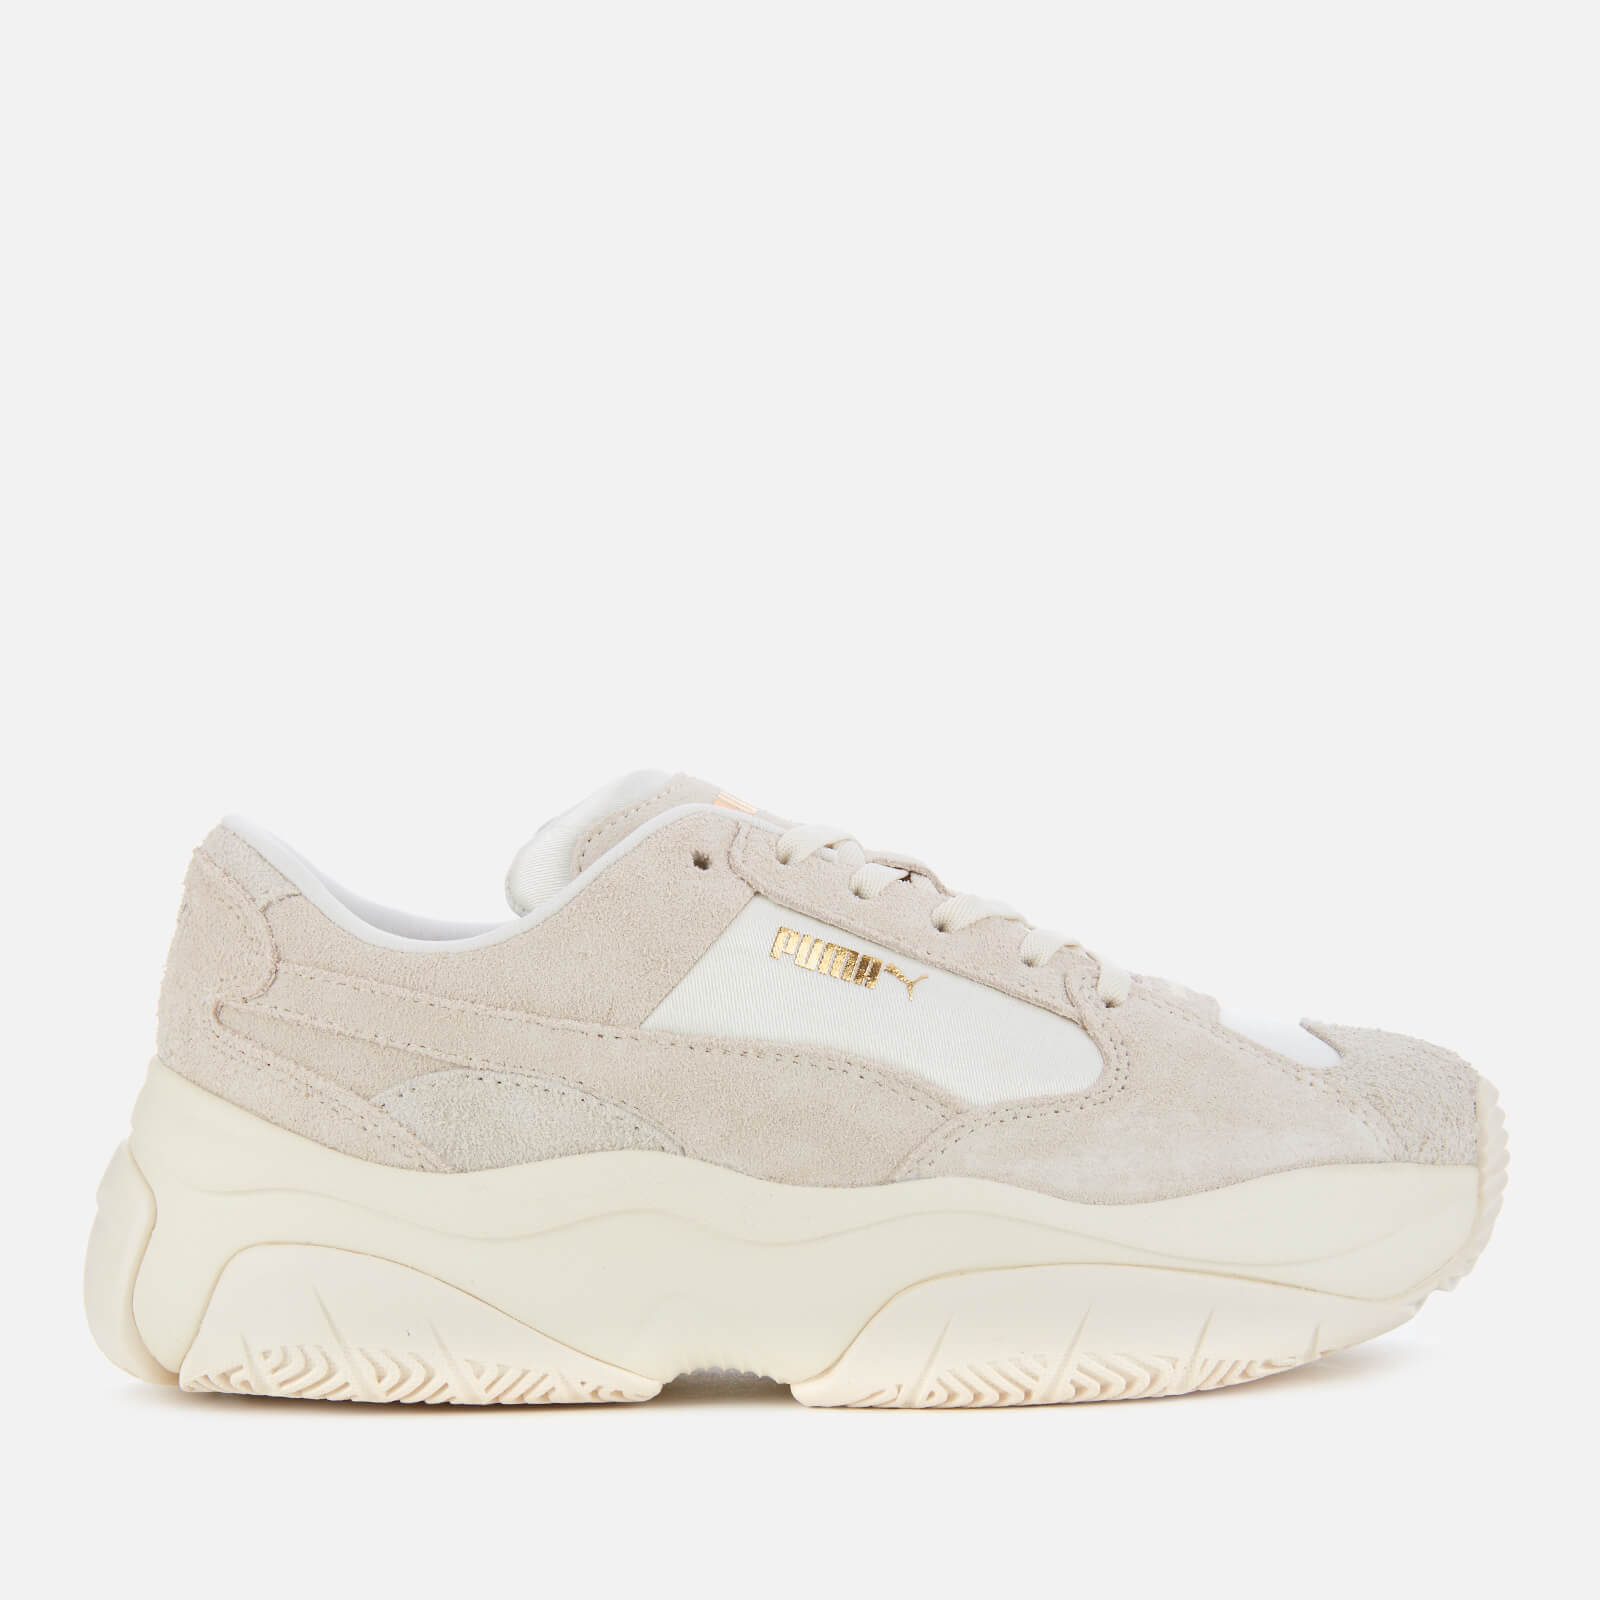 Storm.Y Soft Trainers - Marshmallow 